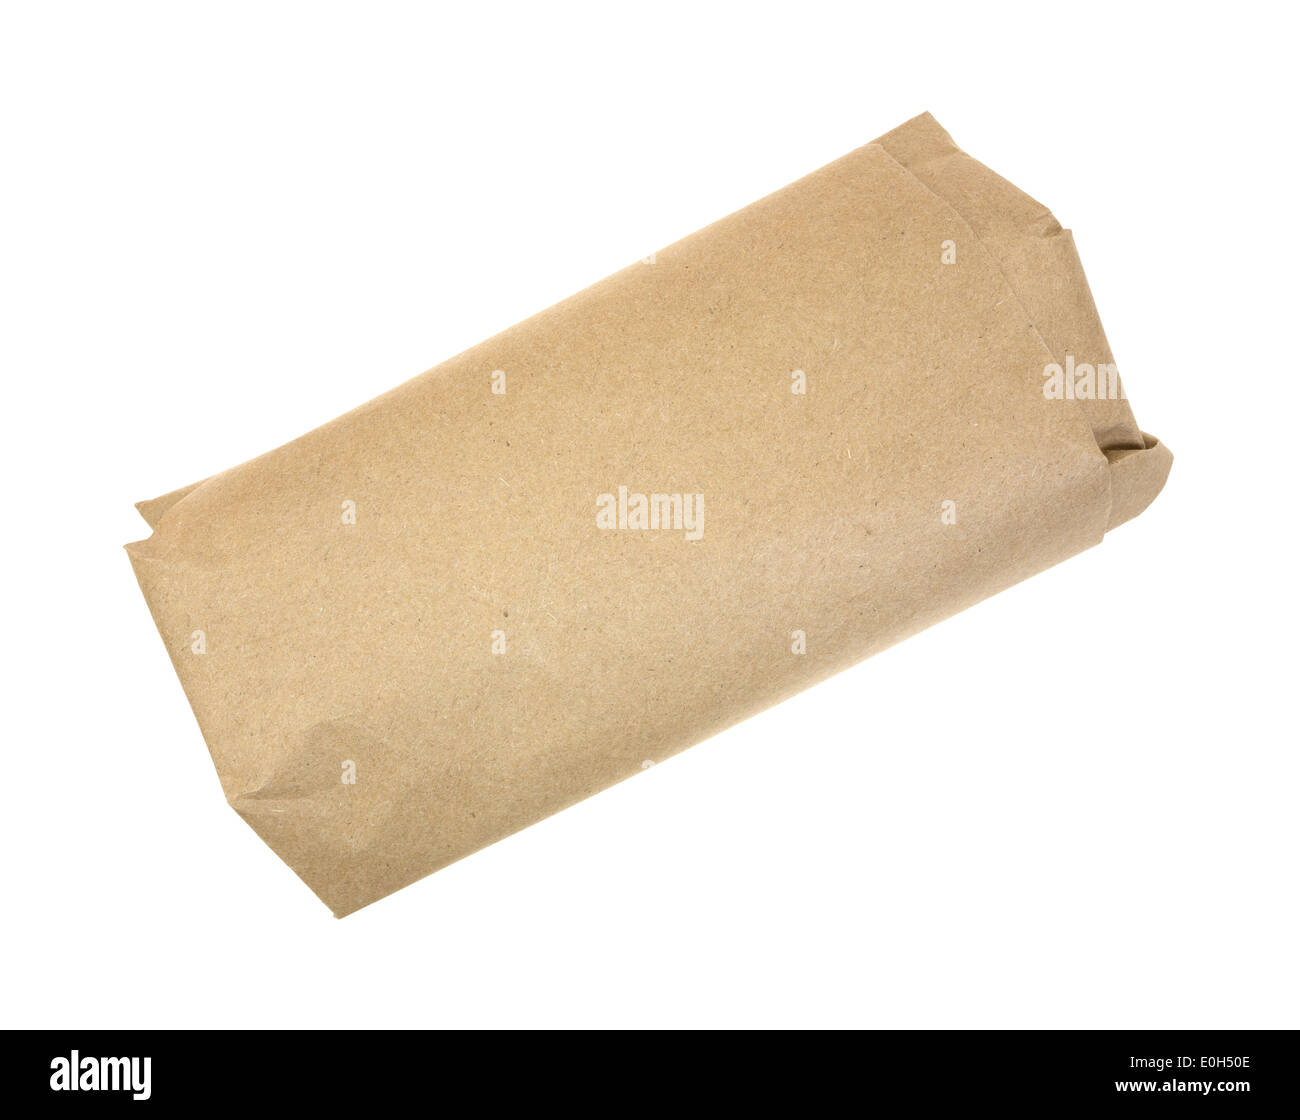 A serving of butchers meat wrapped in brown paper. Stock Photo